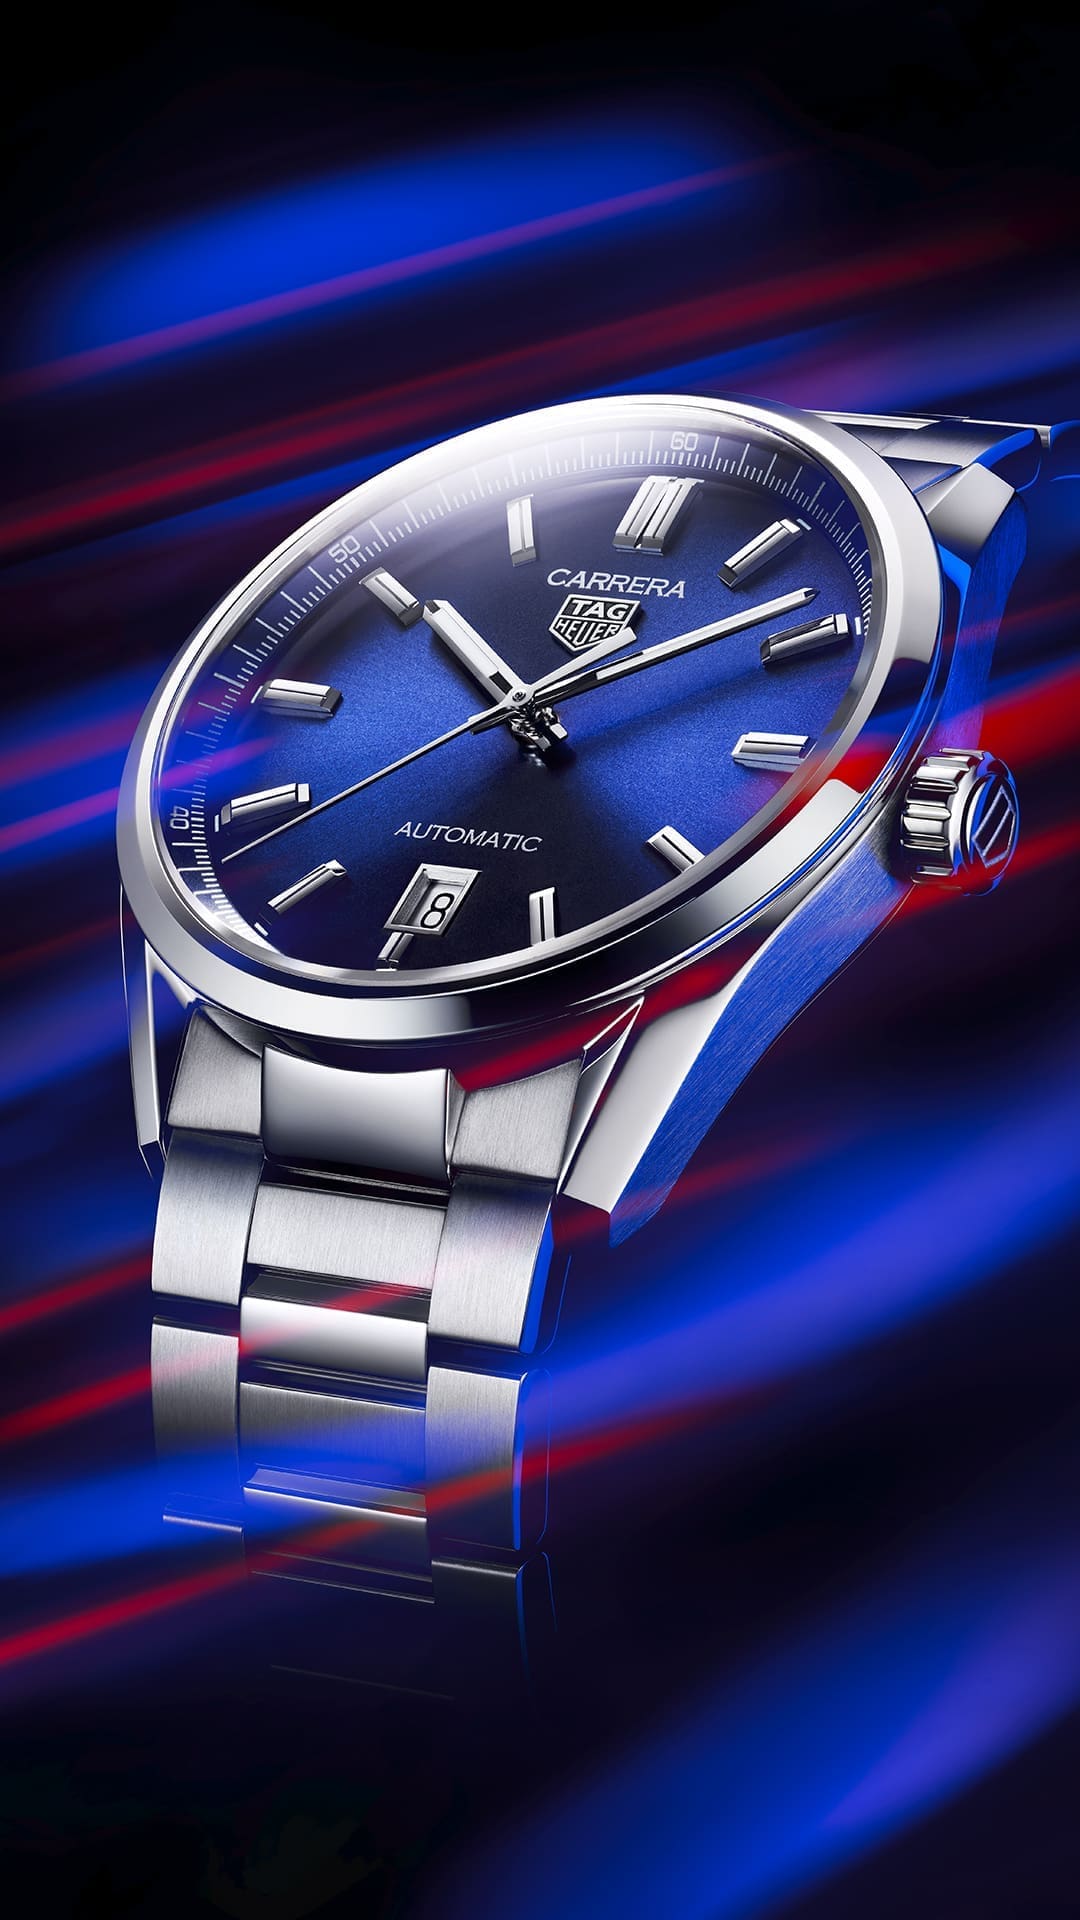 VIDEO: The TAG Heuer Three Hands Collection refines its offering by going back to basics.